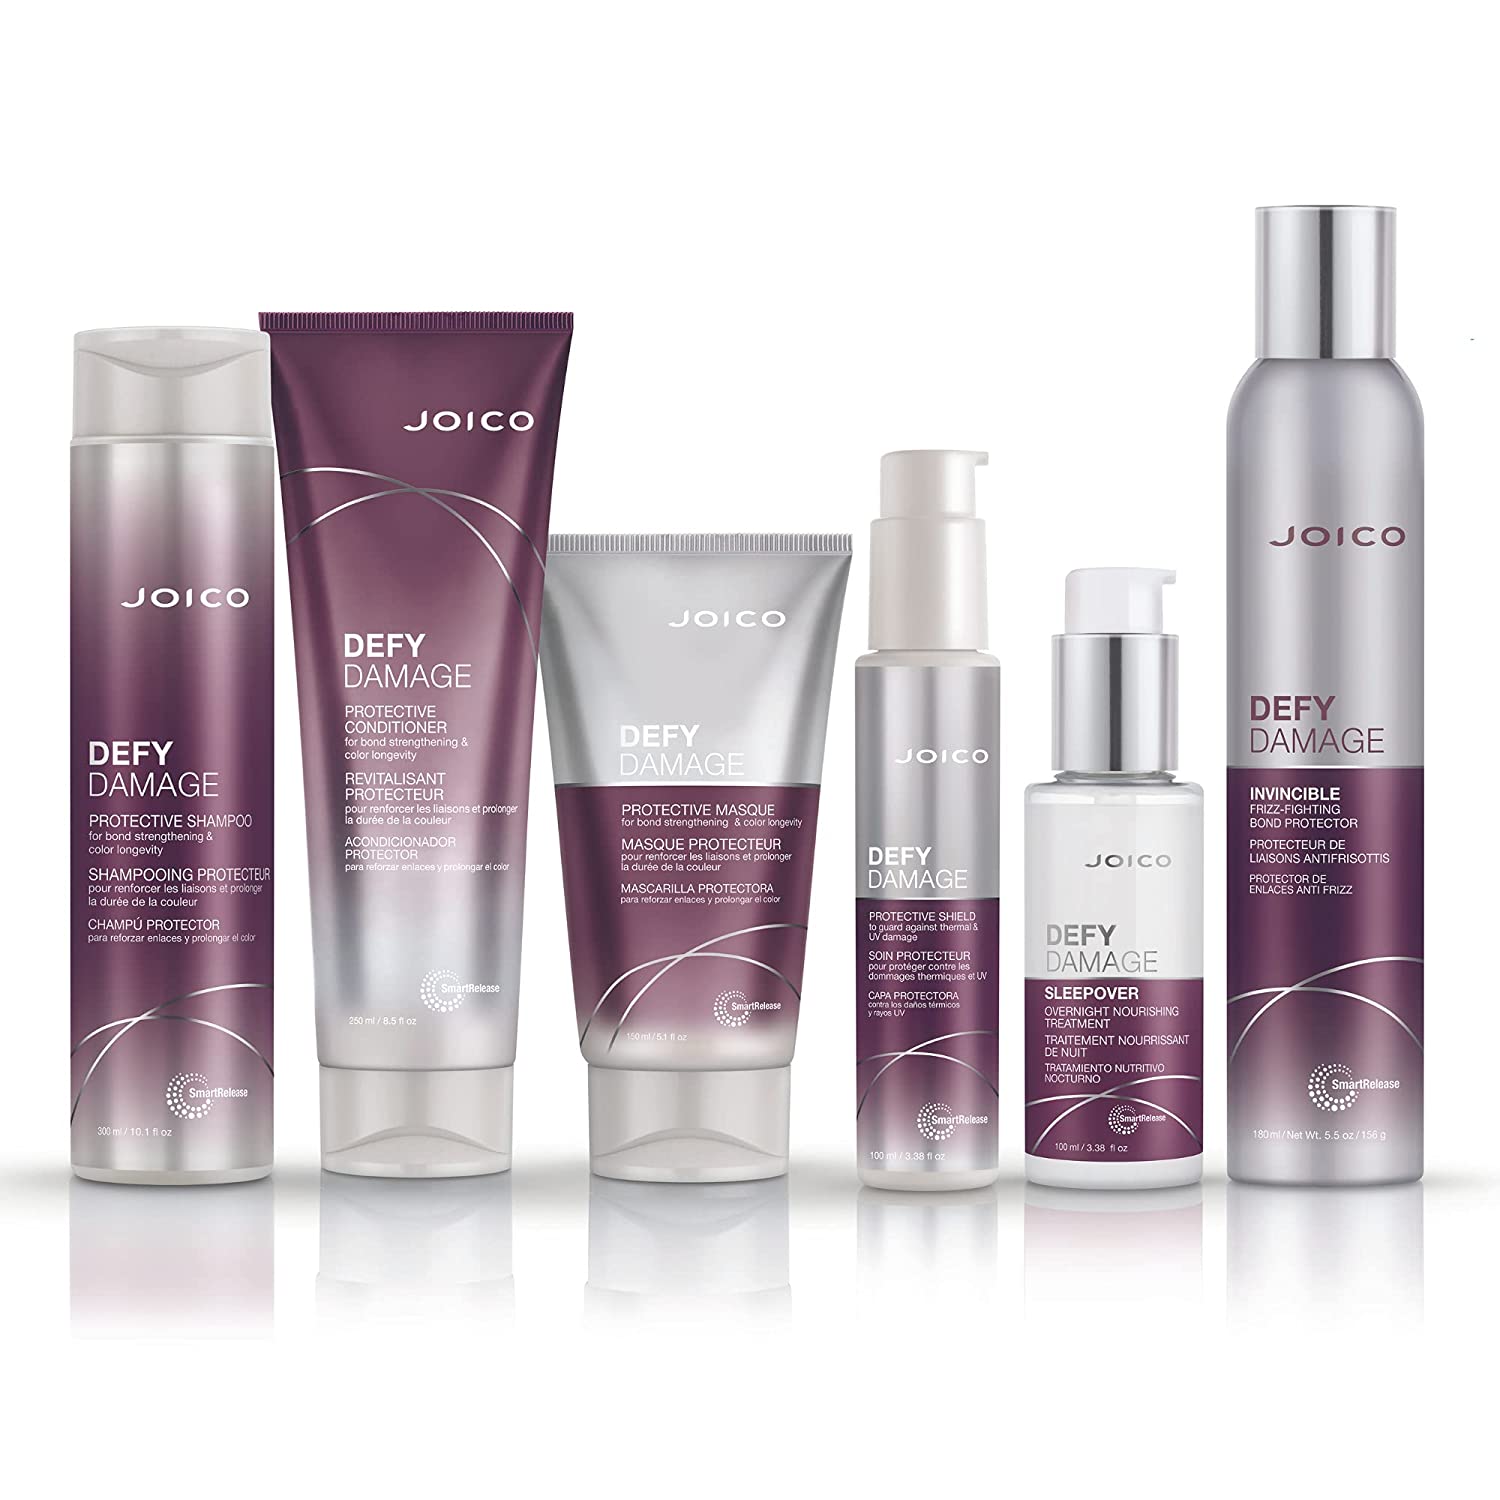 Ideal Choice to buy Joico Hair Products for Hair Care and Treatments.